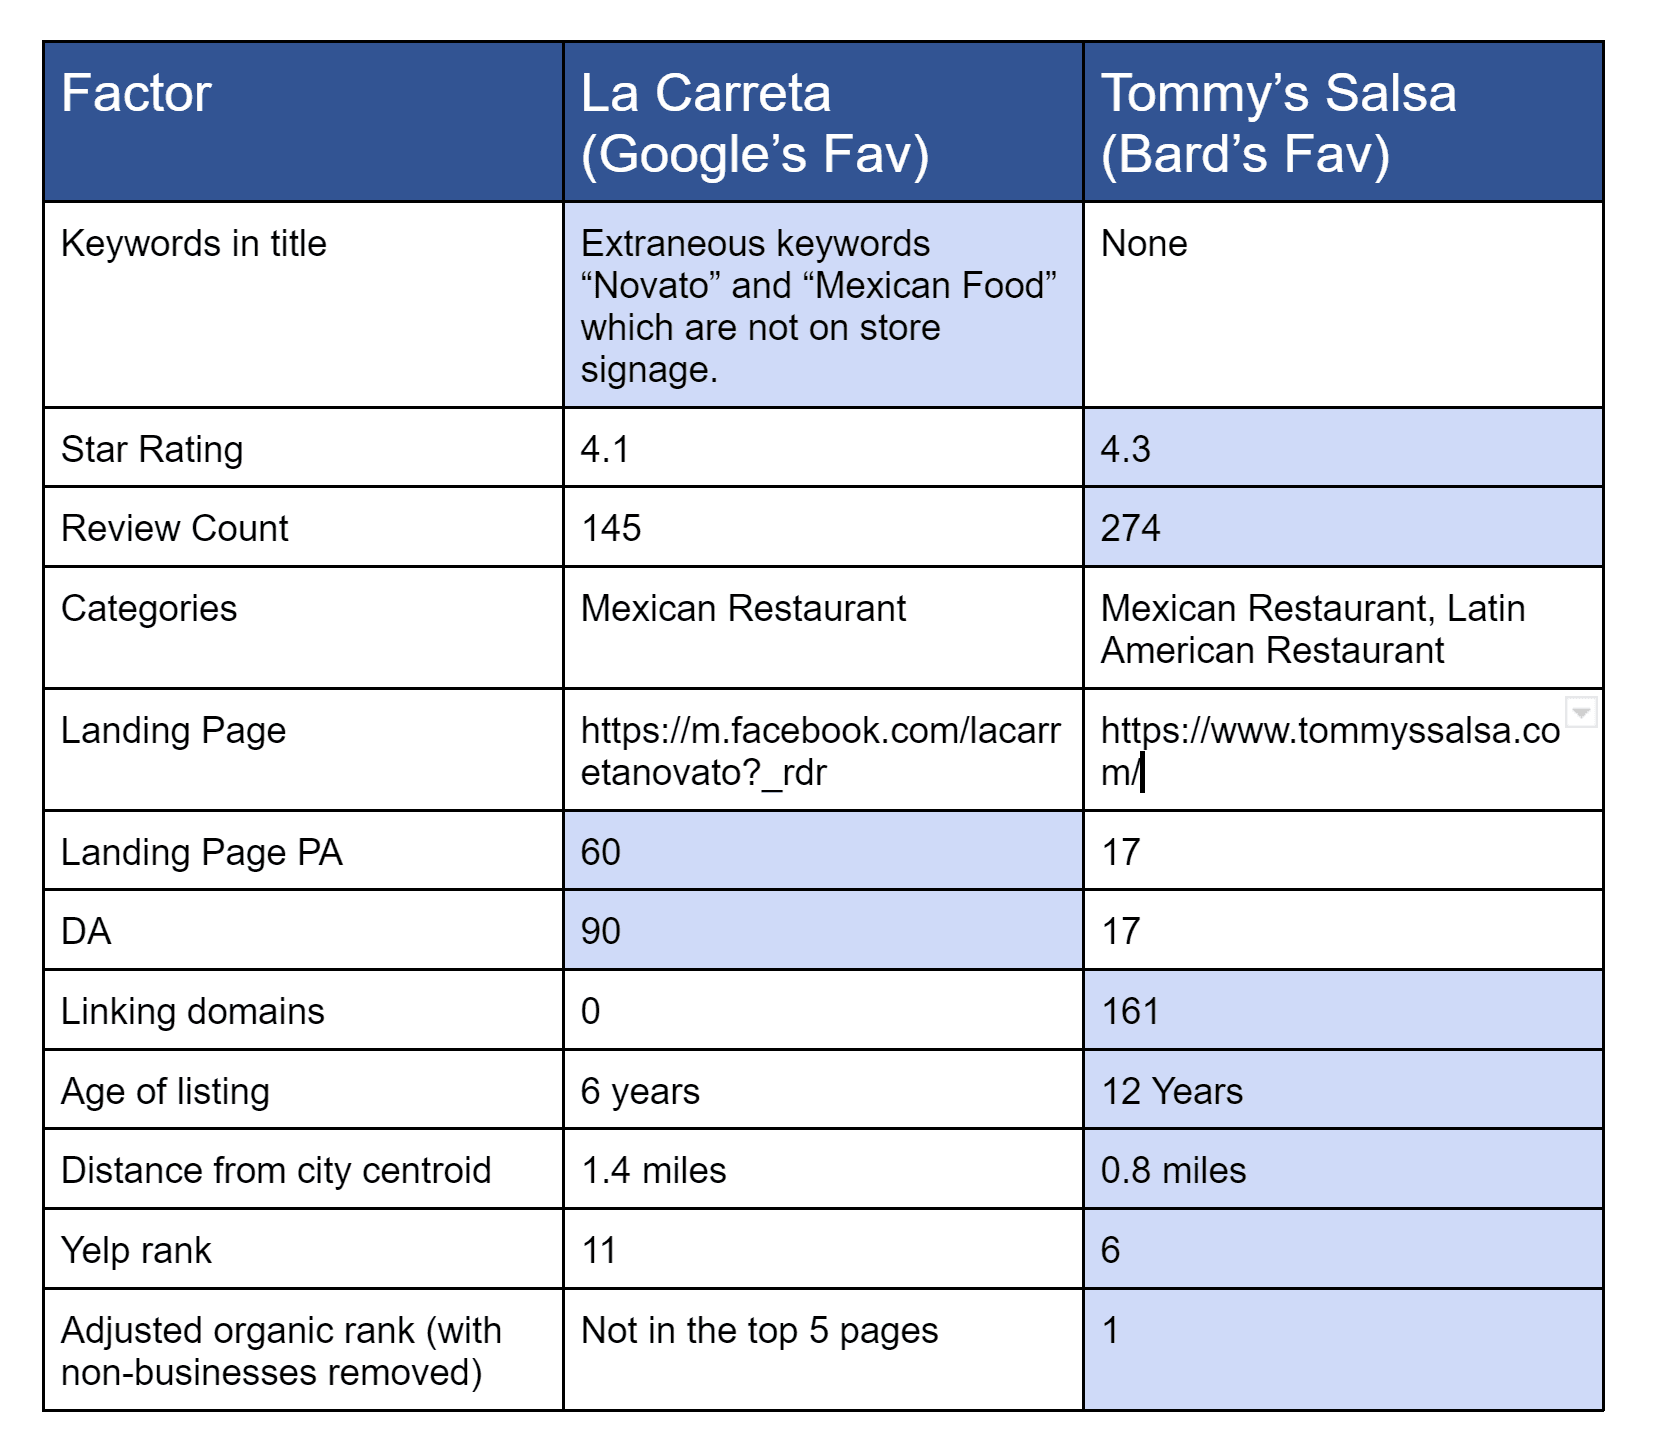 table comparing a short list of local search ranking factors between two restaurants